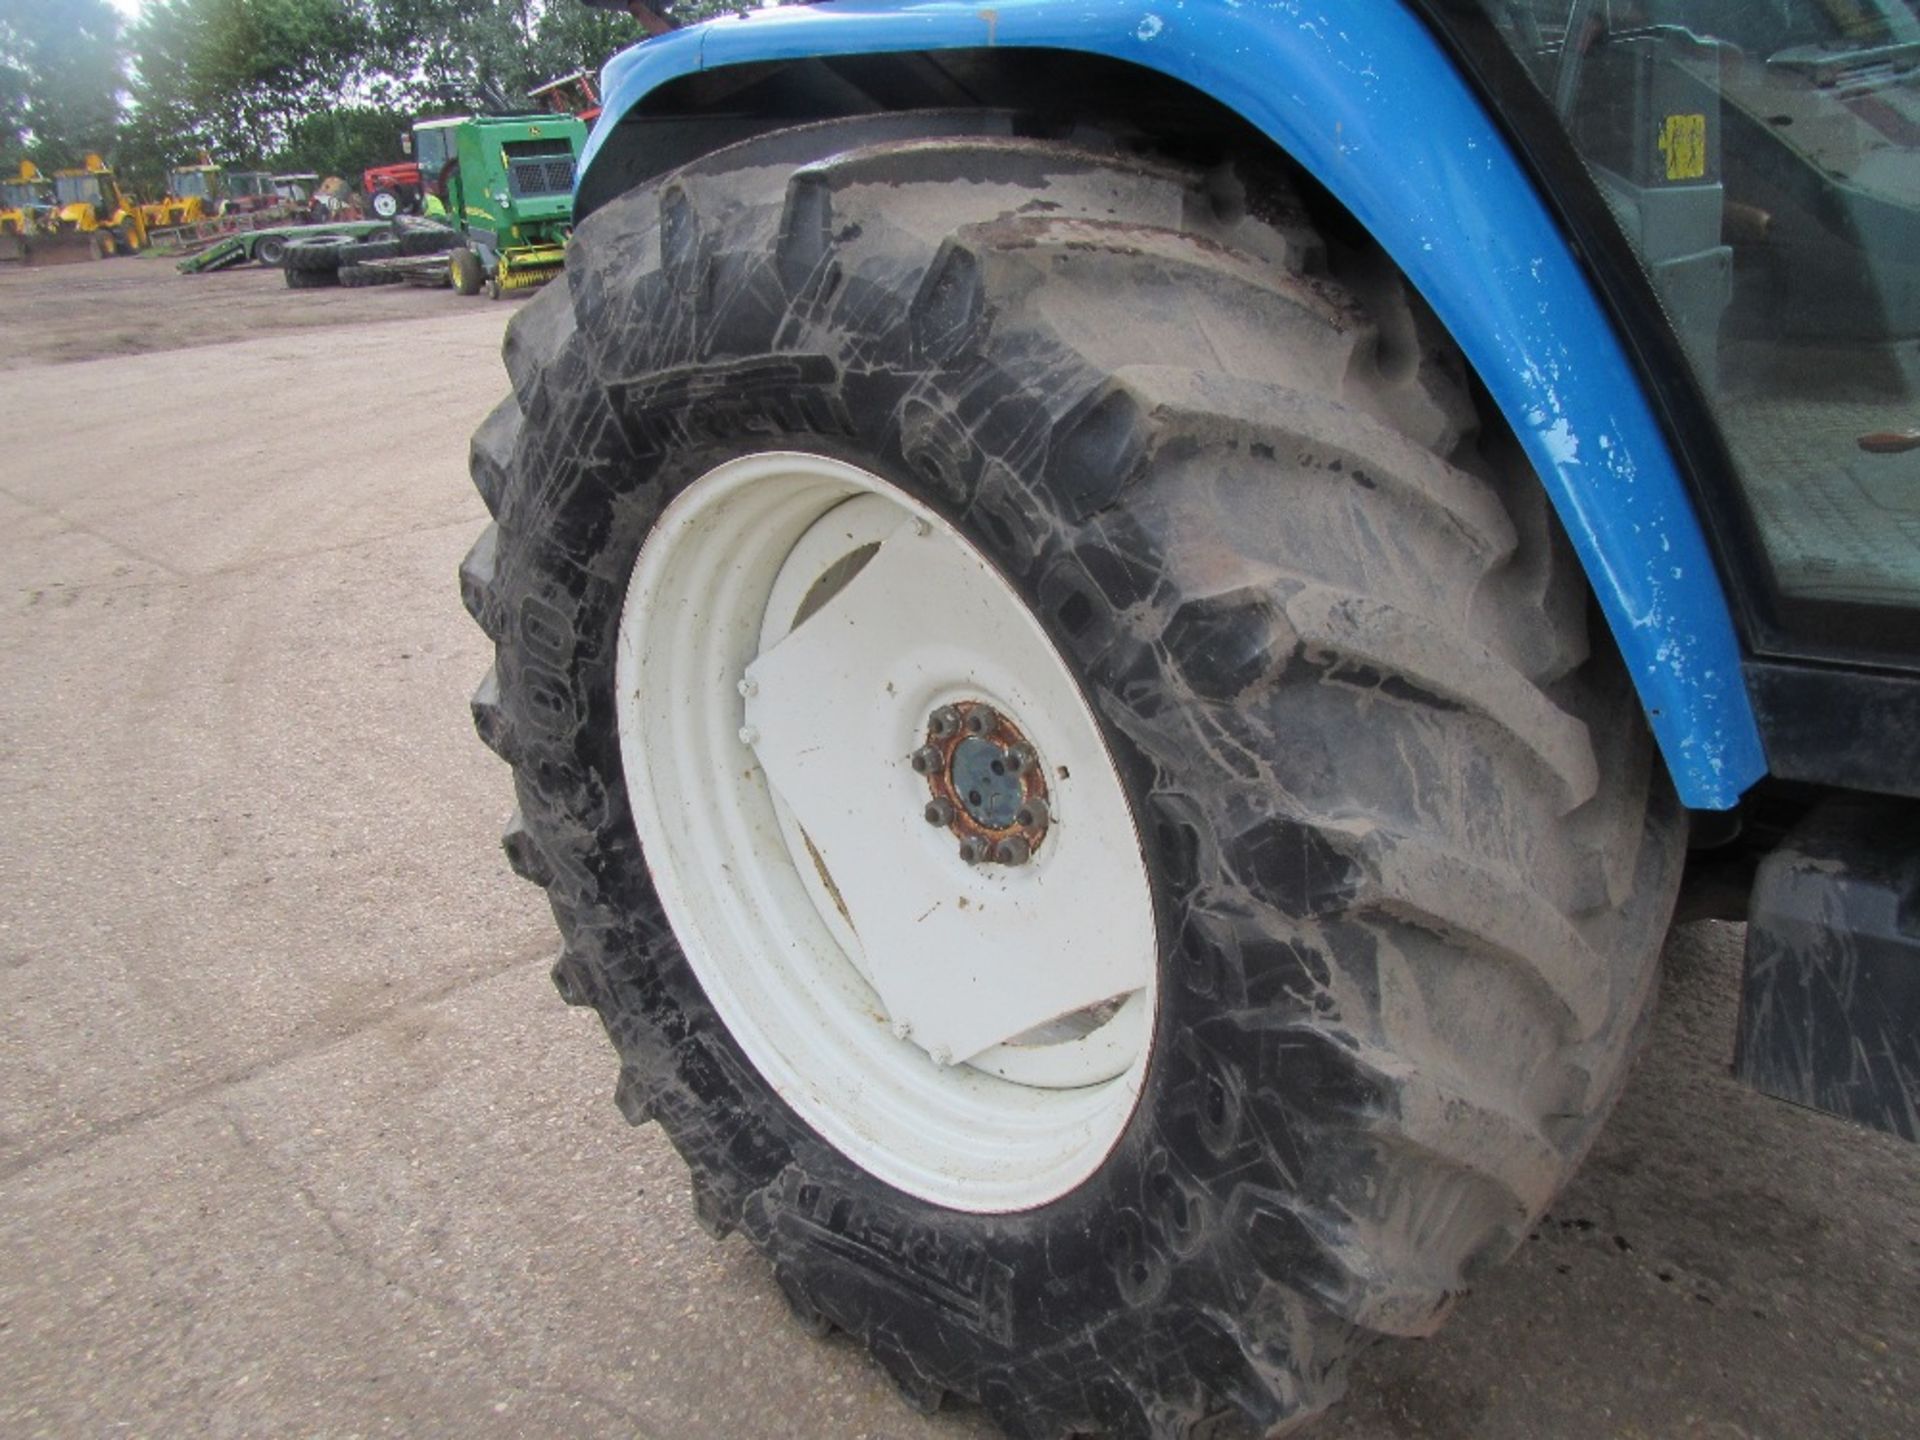 New Holland 8340 SLE 4wd Tractor. V5 will be supplied Reg. No. N243 SCN Ser. No. 025324B - Image 5 of 18